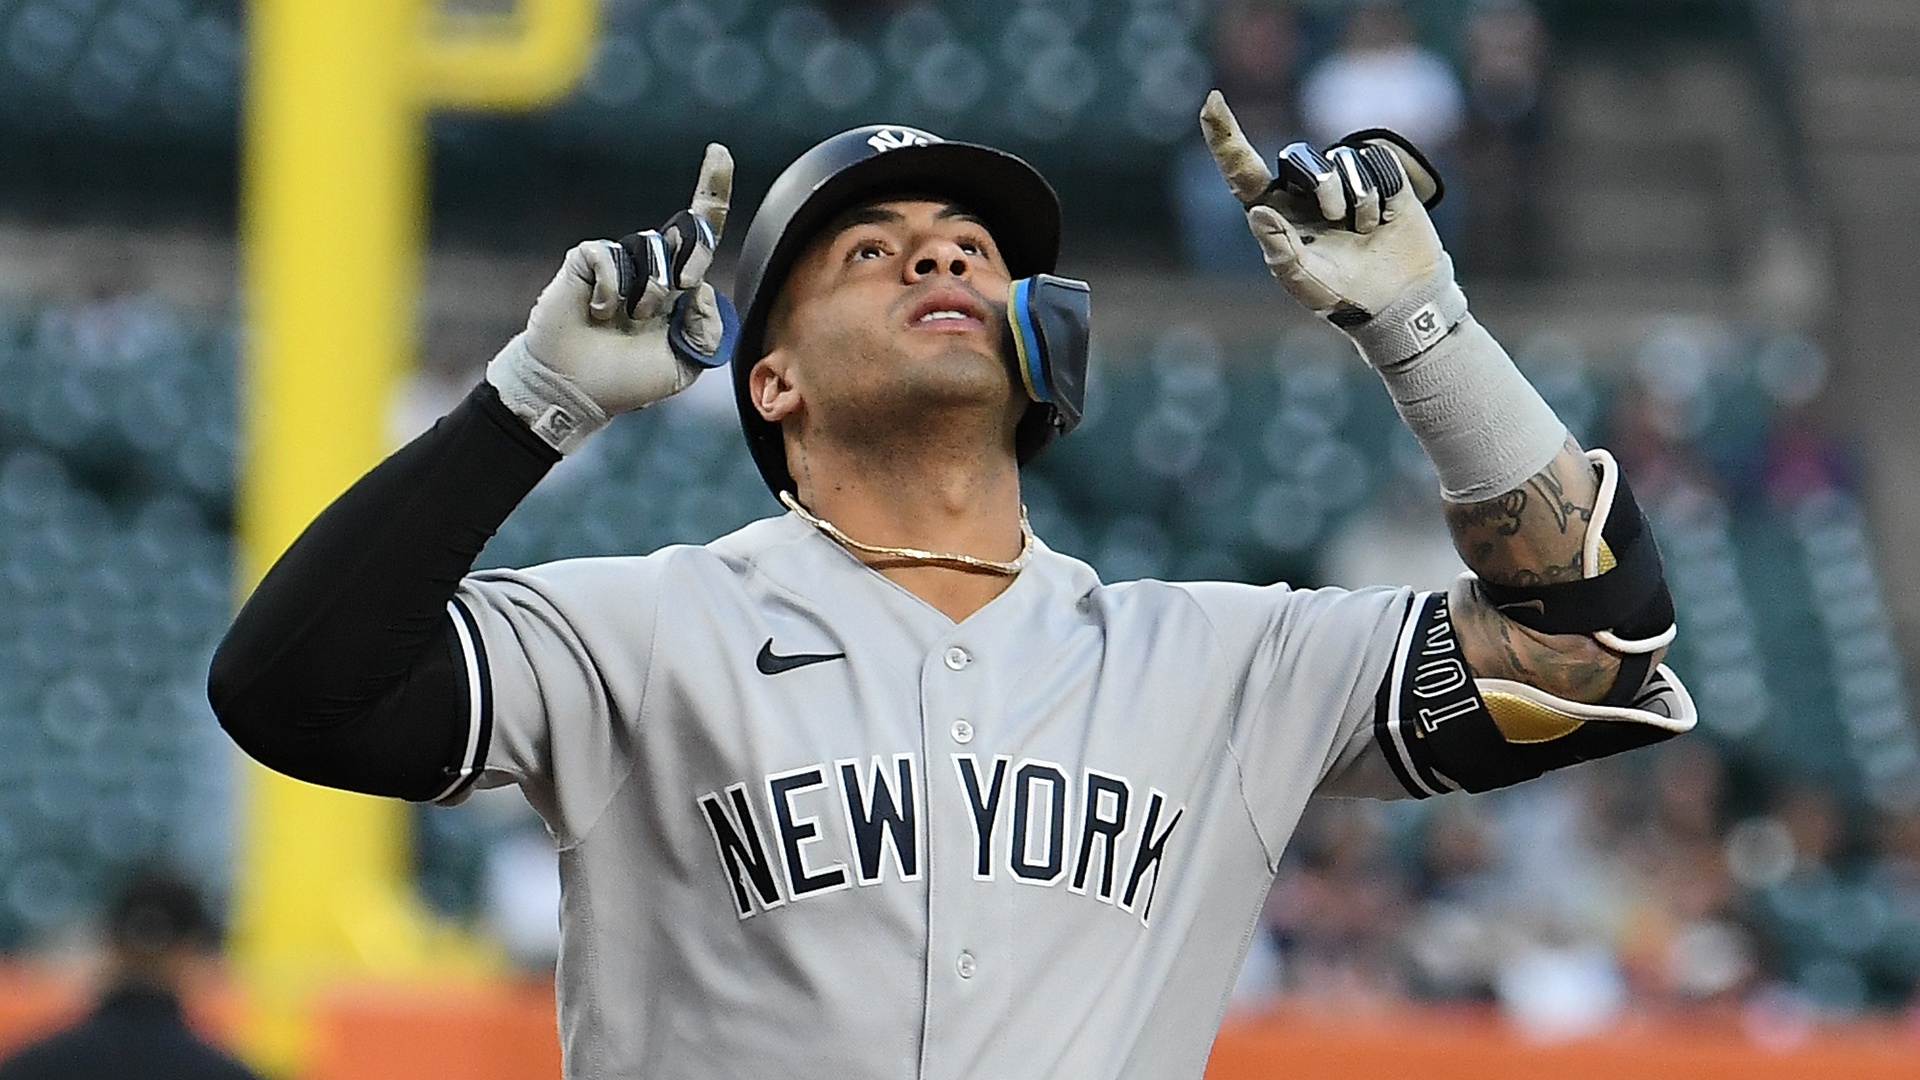 Yankees: Gleyber Torres confirms 'Glasses Gleyber' will stay after